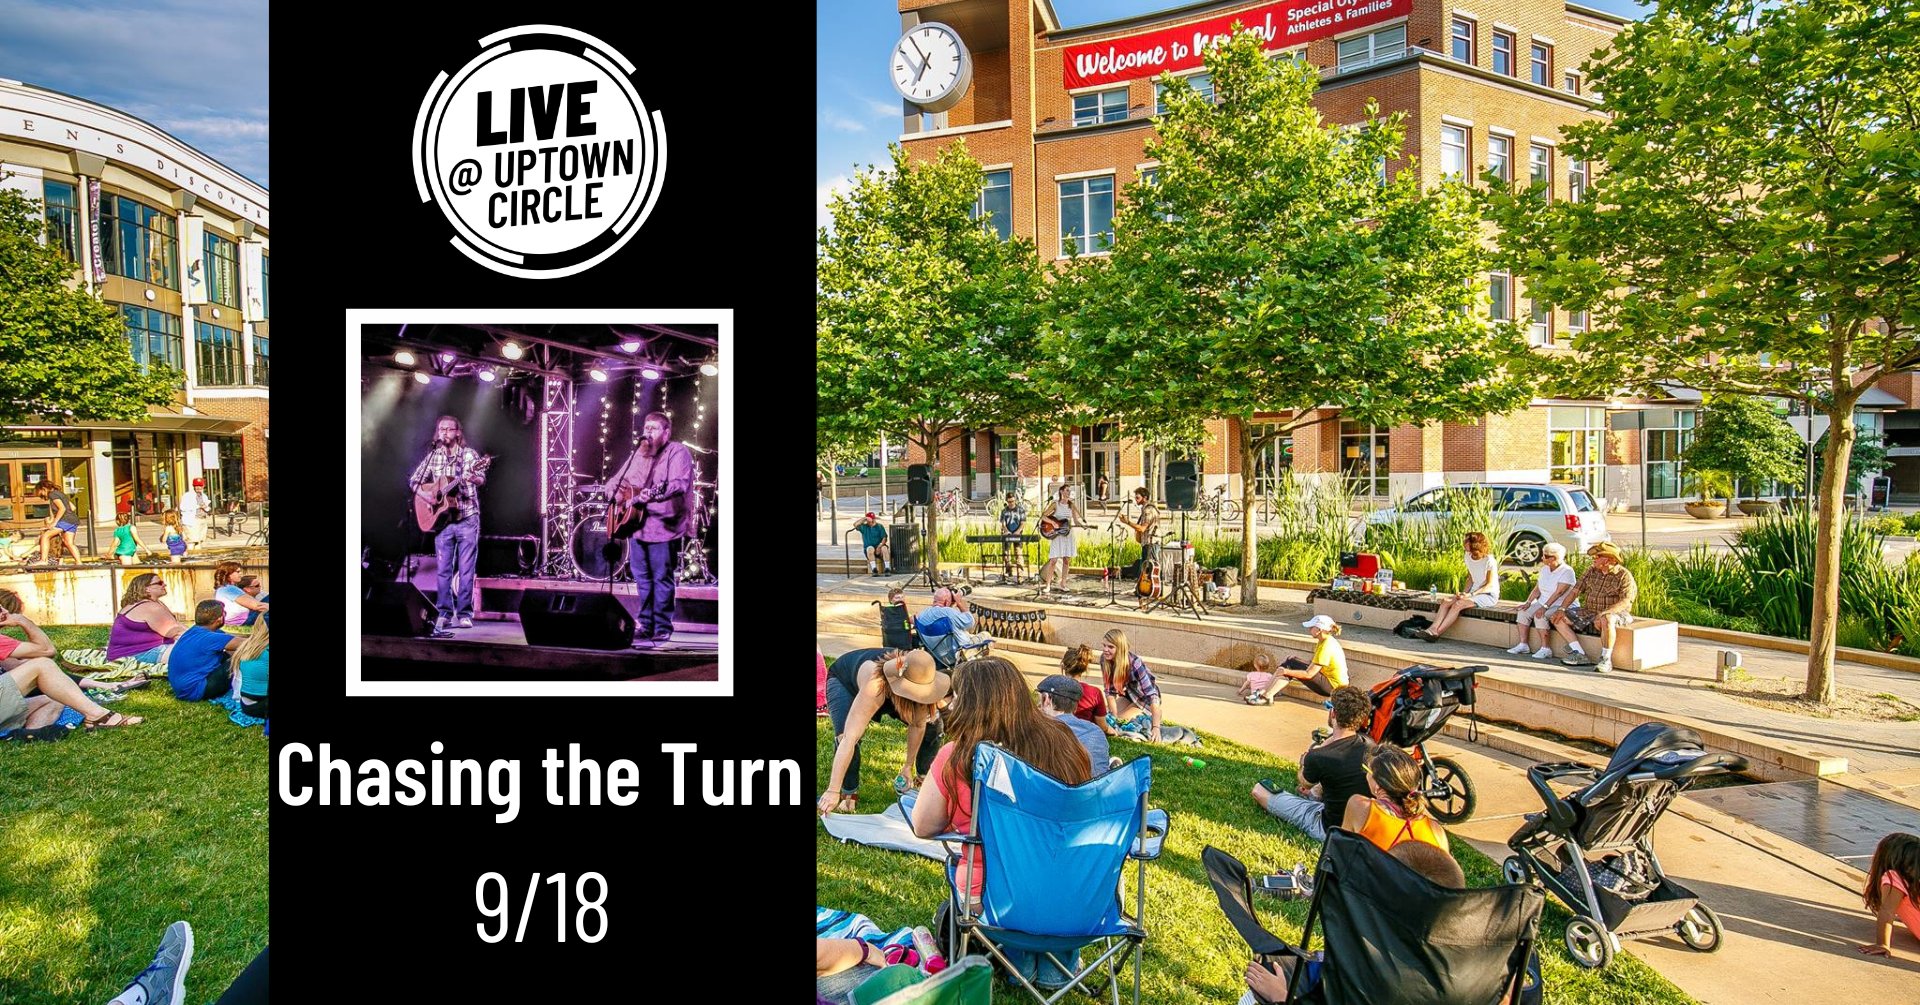 Normal LIVE presents Chasing the Turn @ Uptown Circle